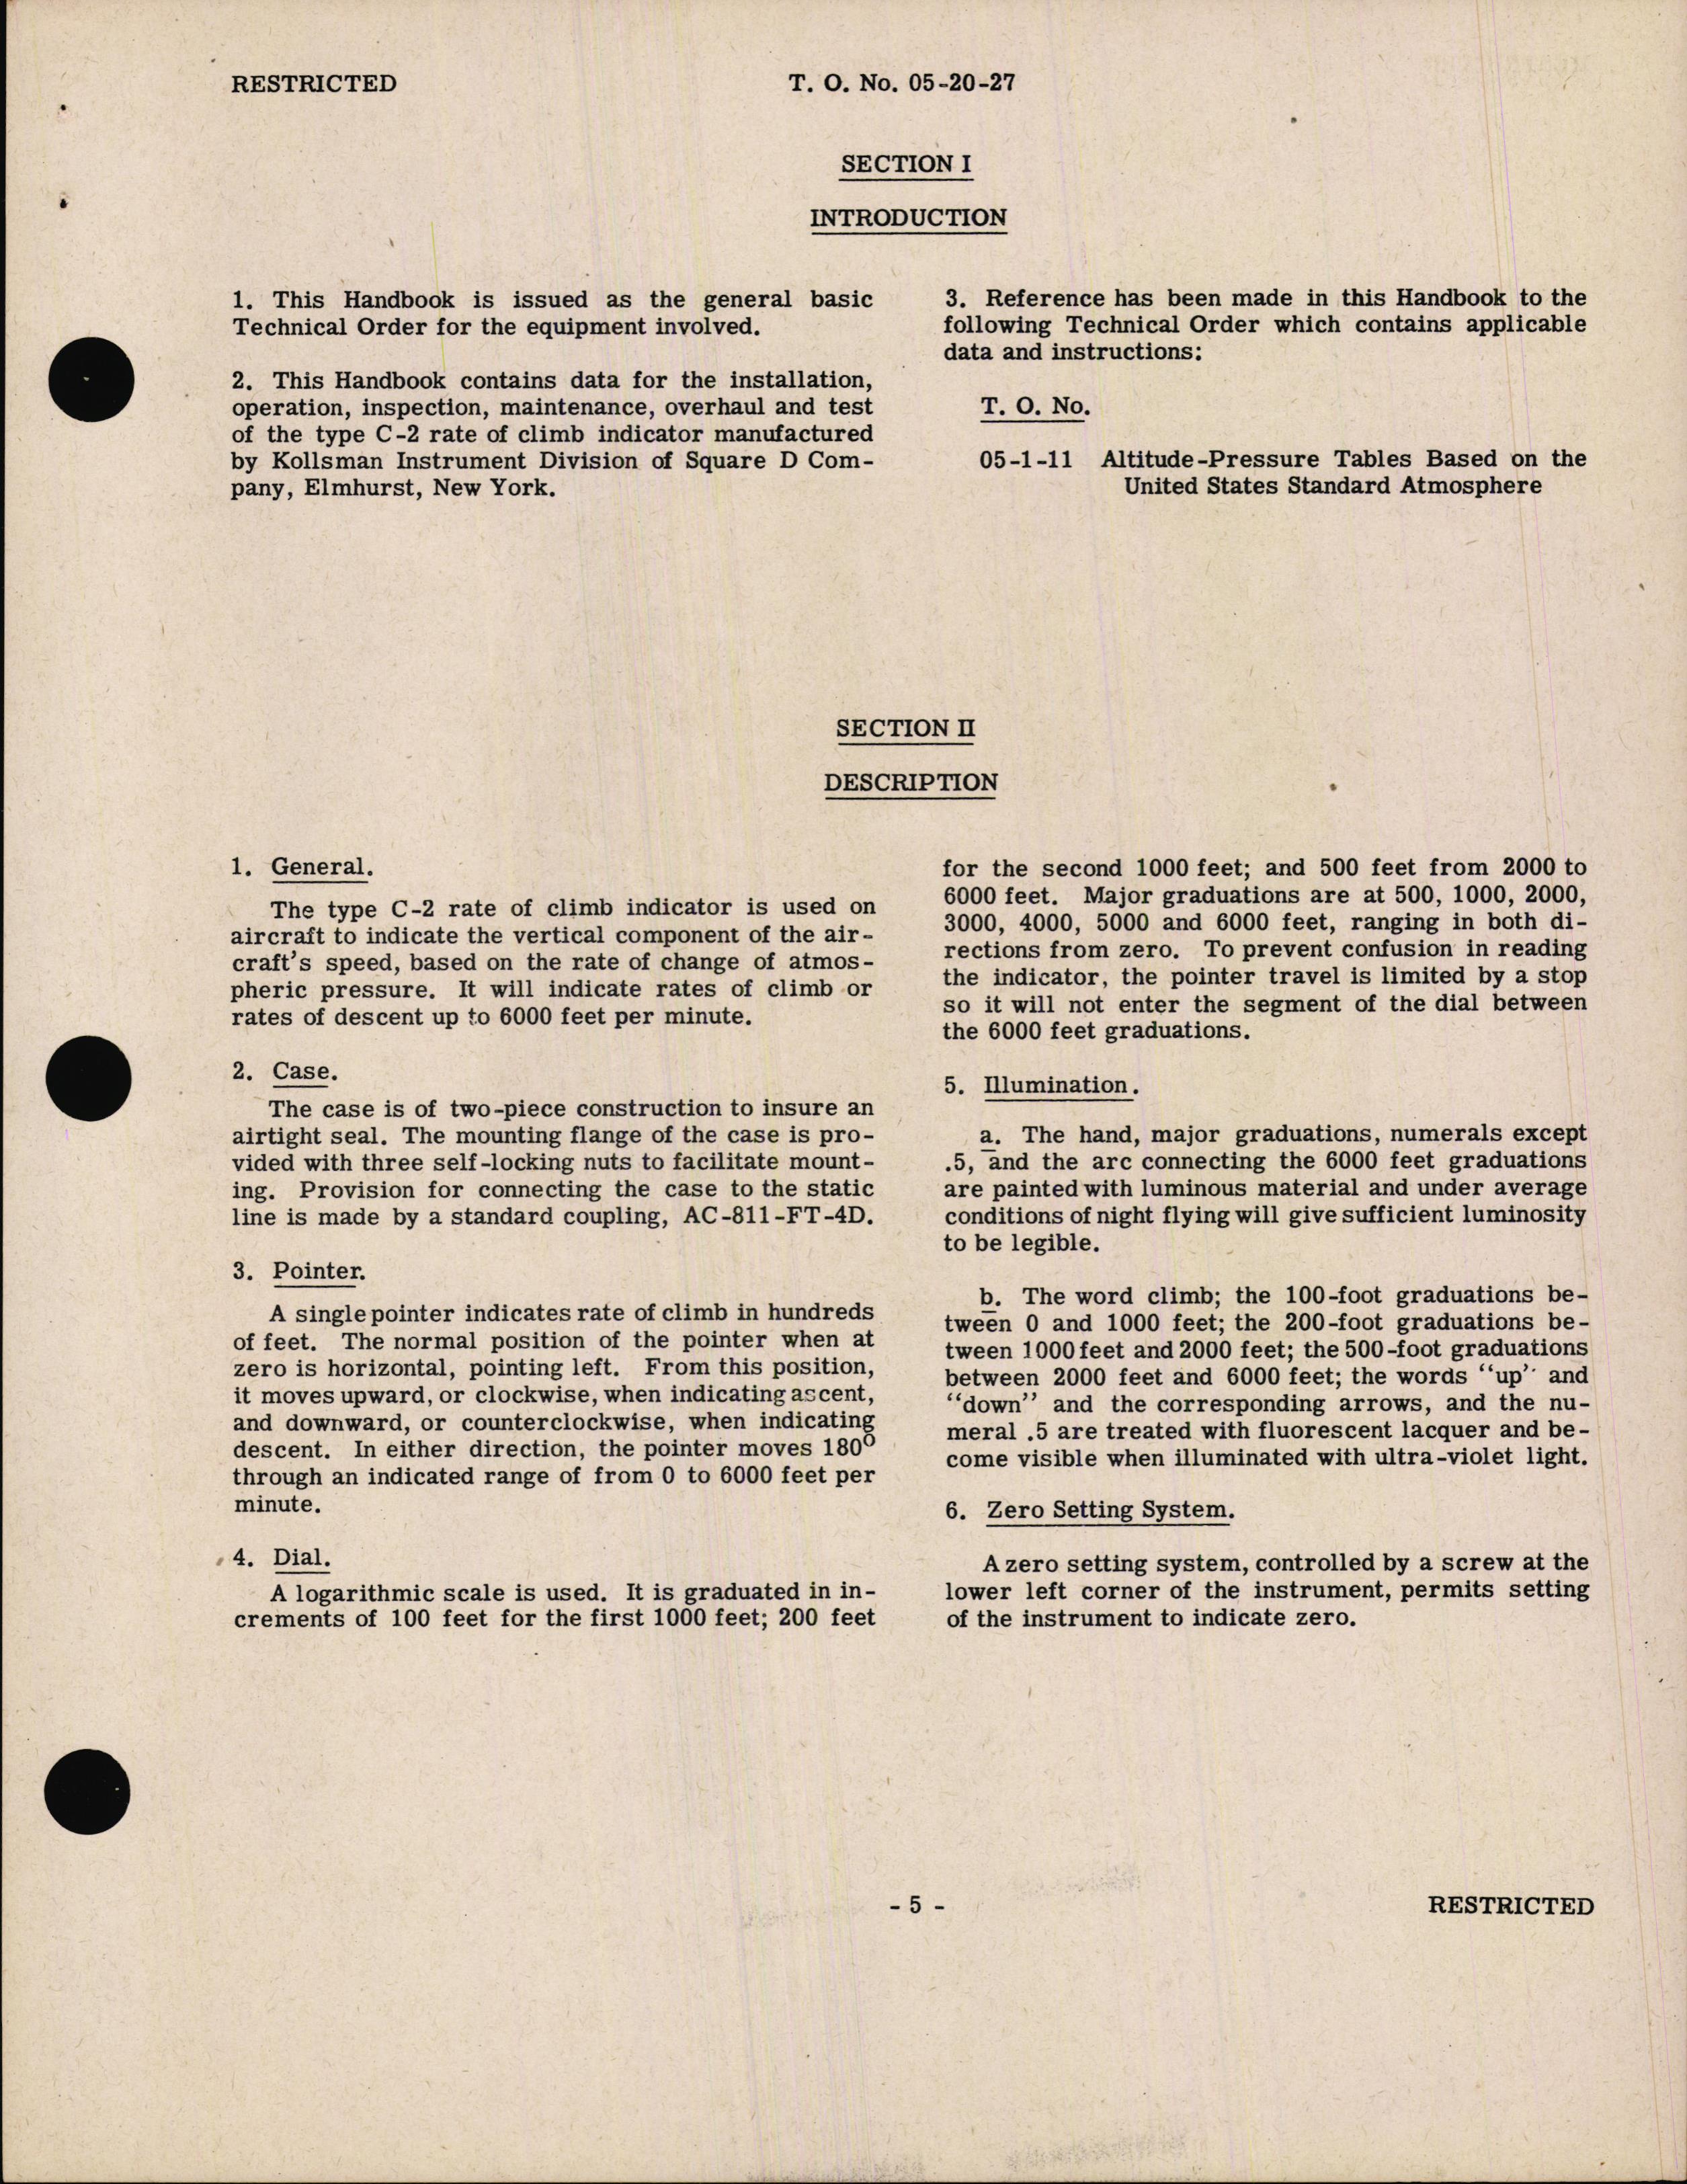 Sample page 7 from AirCorps Library document: Handbook of Instructions with Parts Catalog for Type C-2 Rate of Climb Indicator